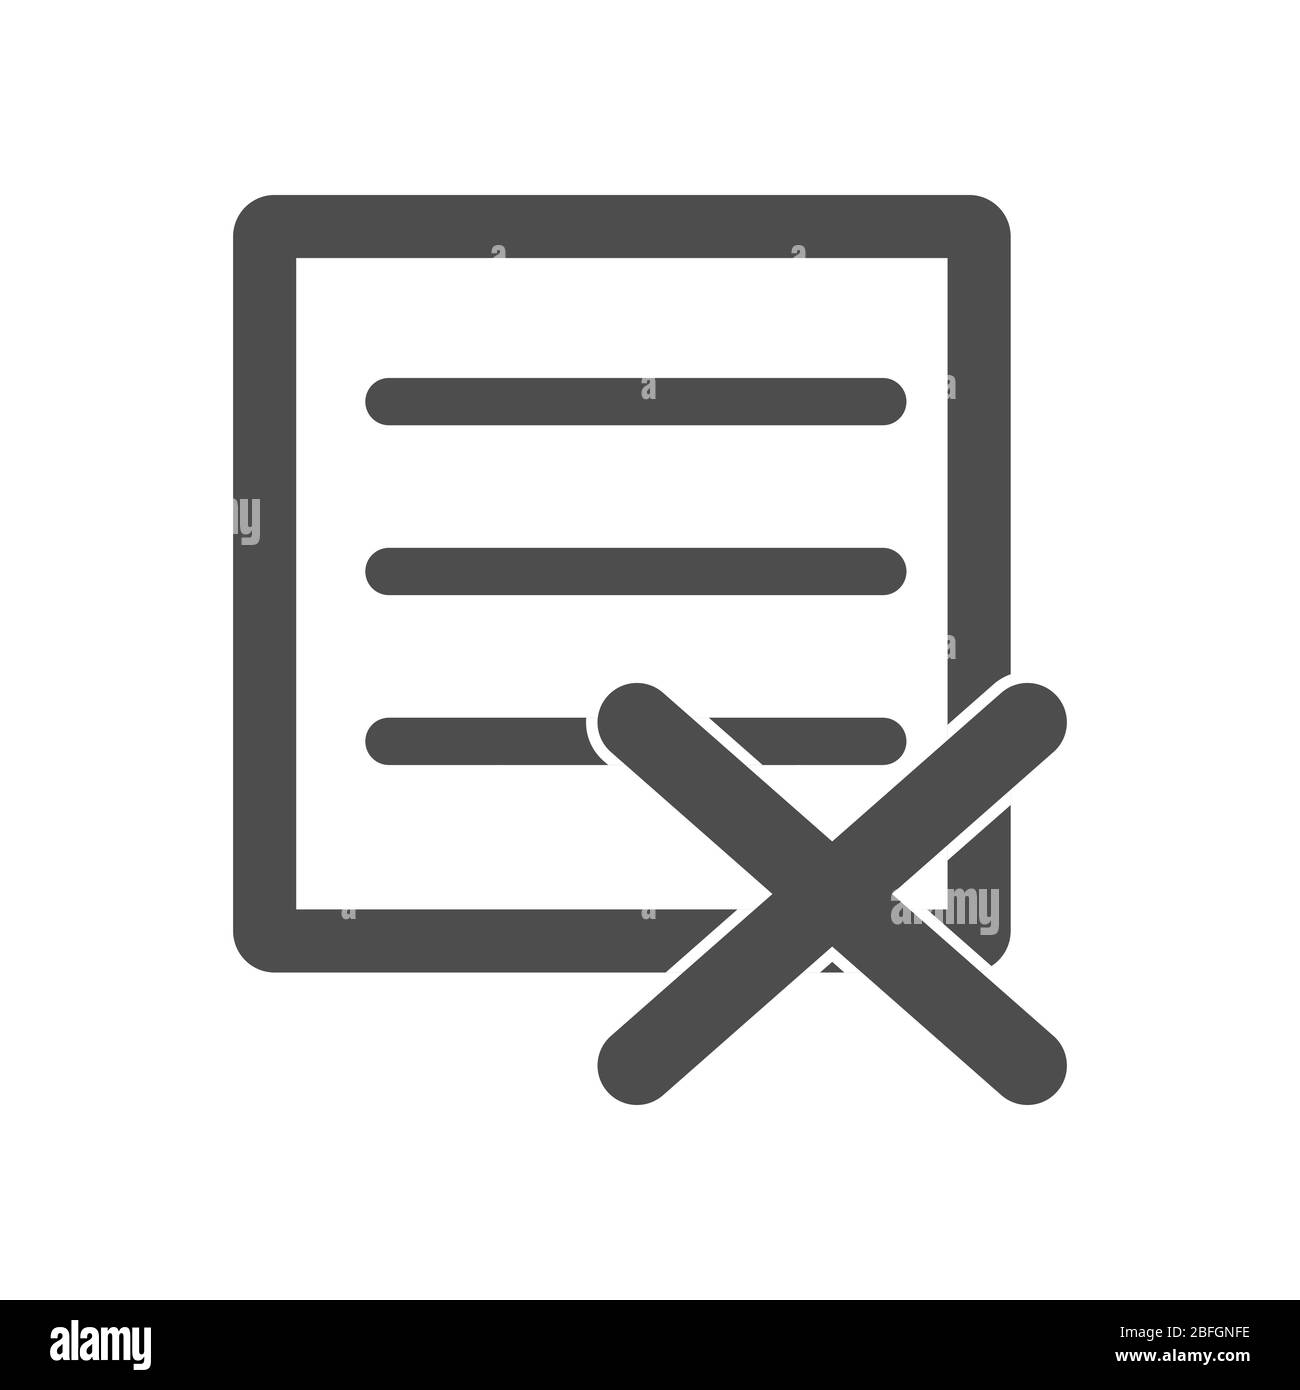 Rejected document, vector icon for websites and apps. Stock illustration isolated on a white background. Simple design Stock Vector